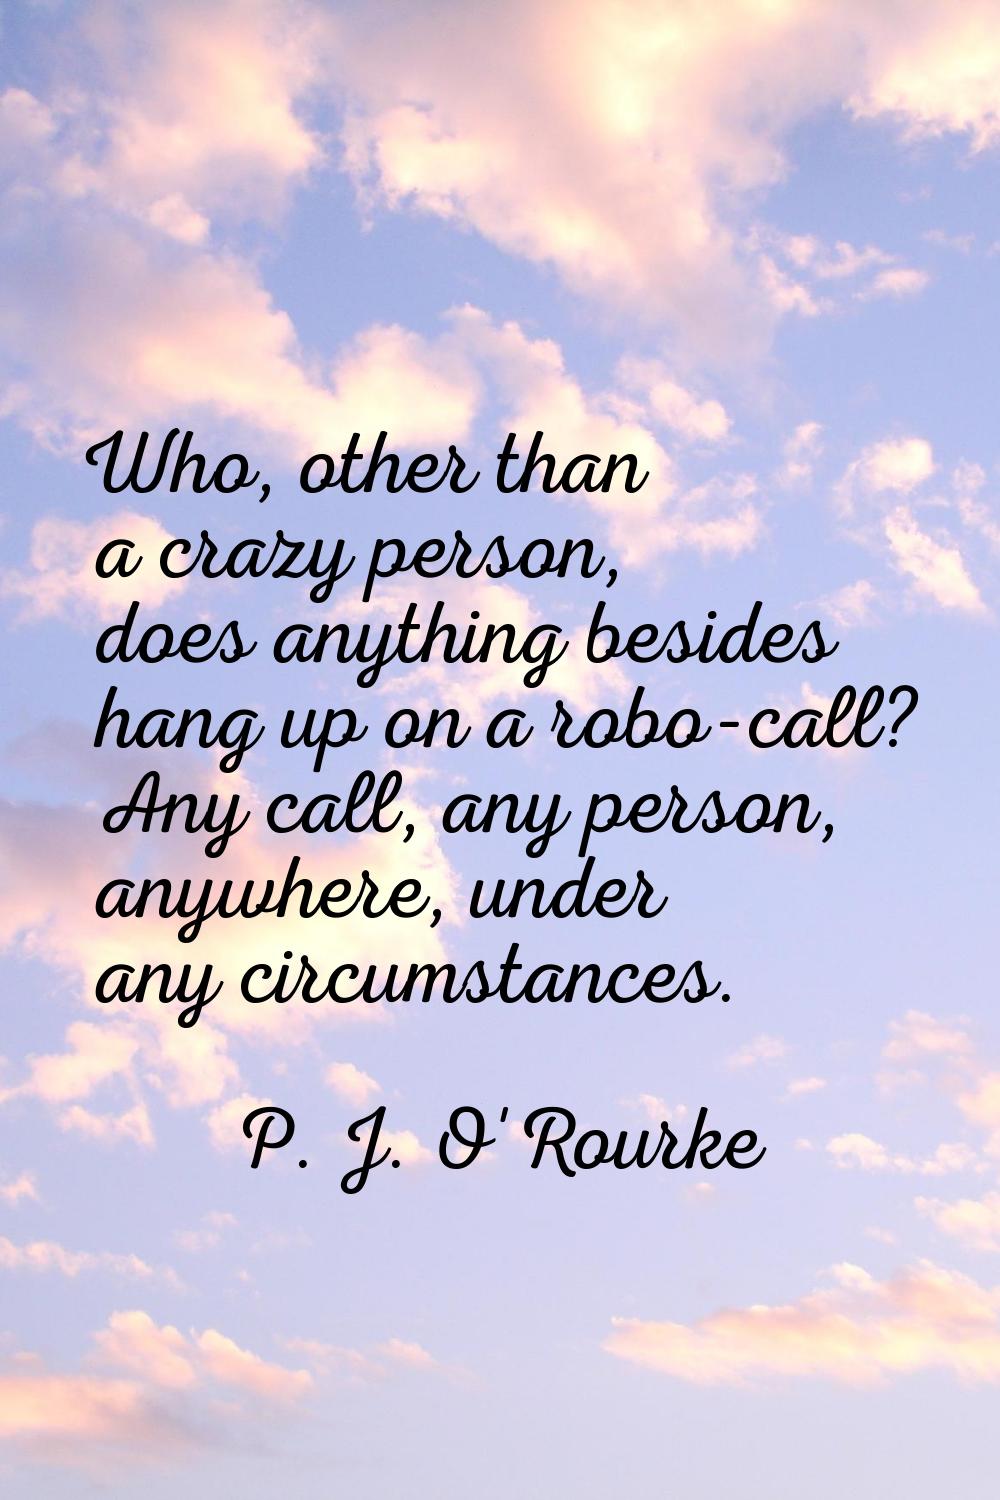 Who, other than a crazy person, does anything besides hang up on a robo-call? Any call, any person,